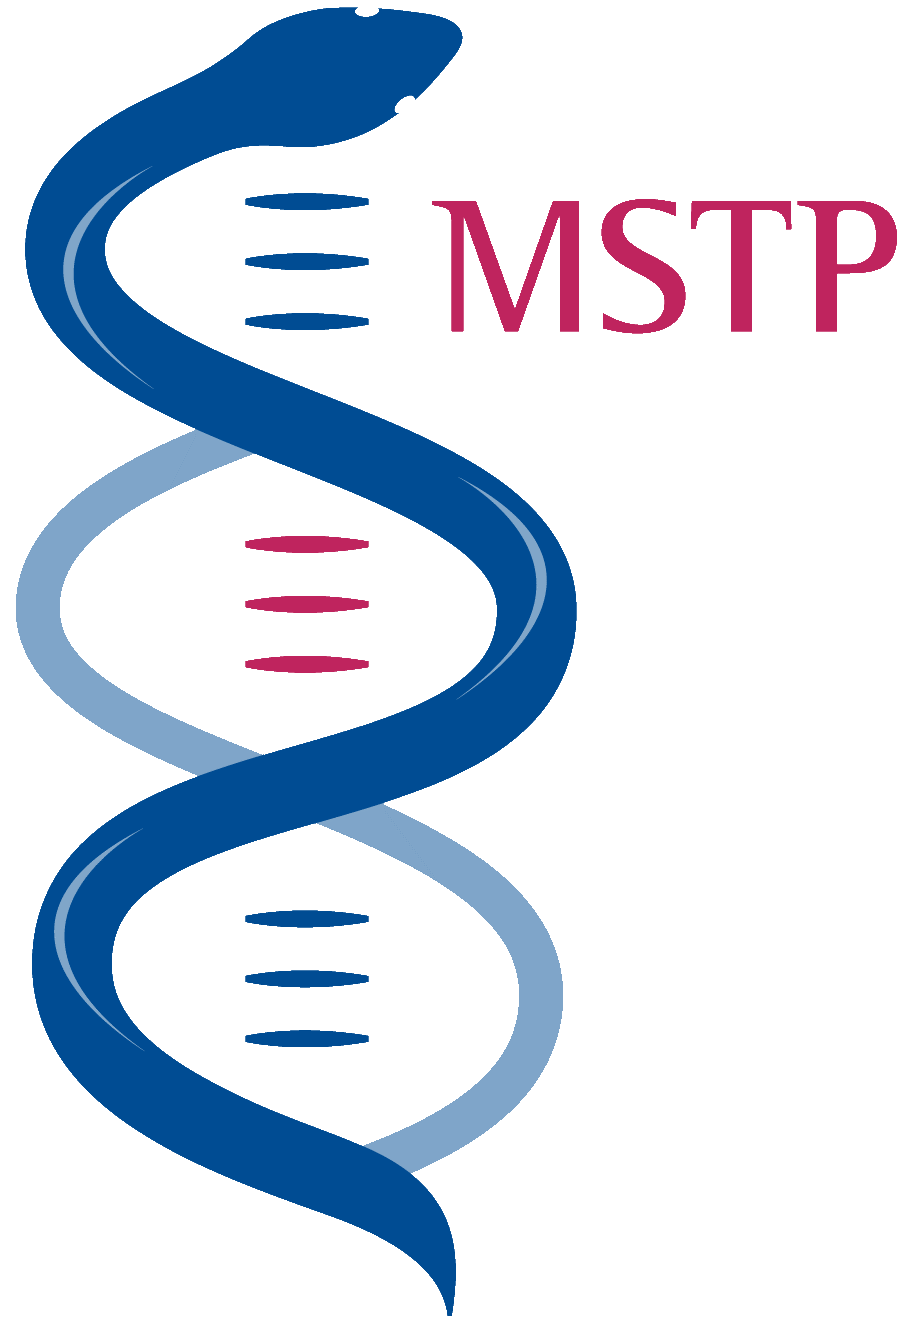 MSTP - University of Illinois College of Medicine at Chicago